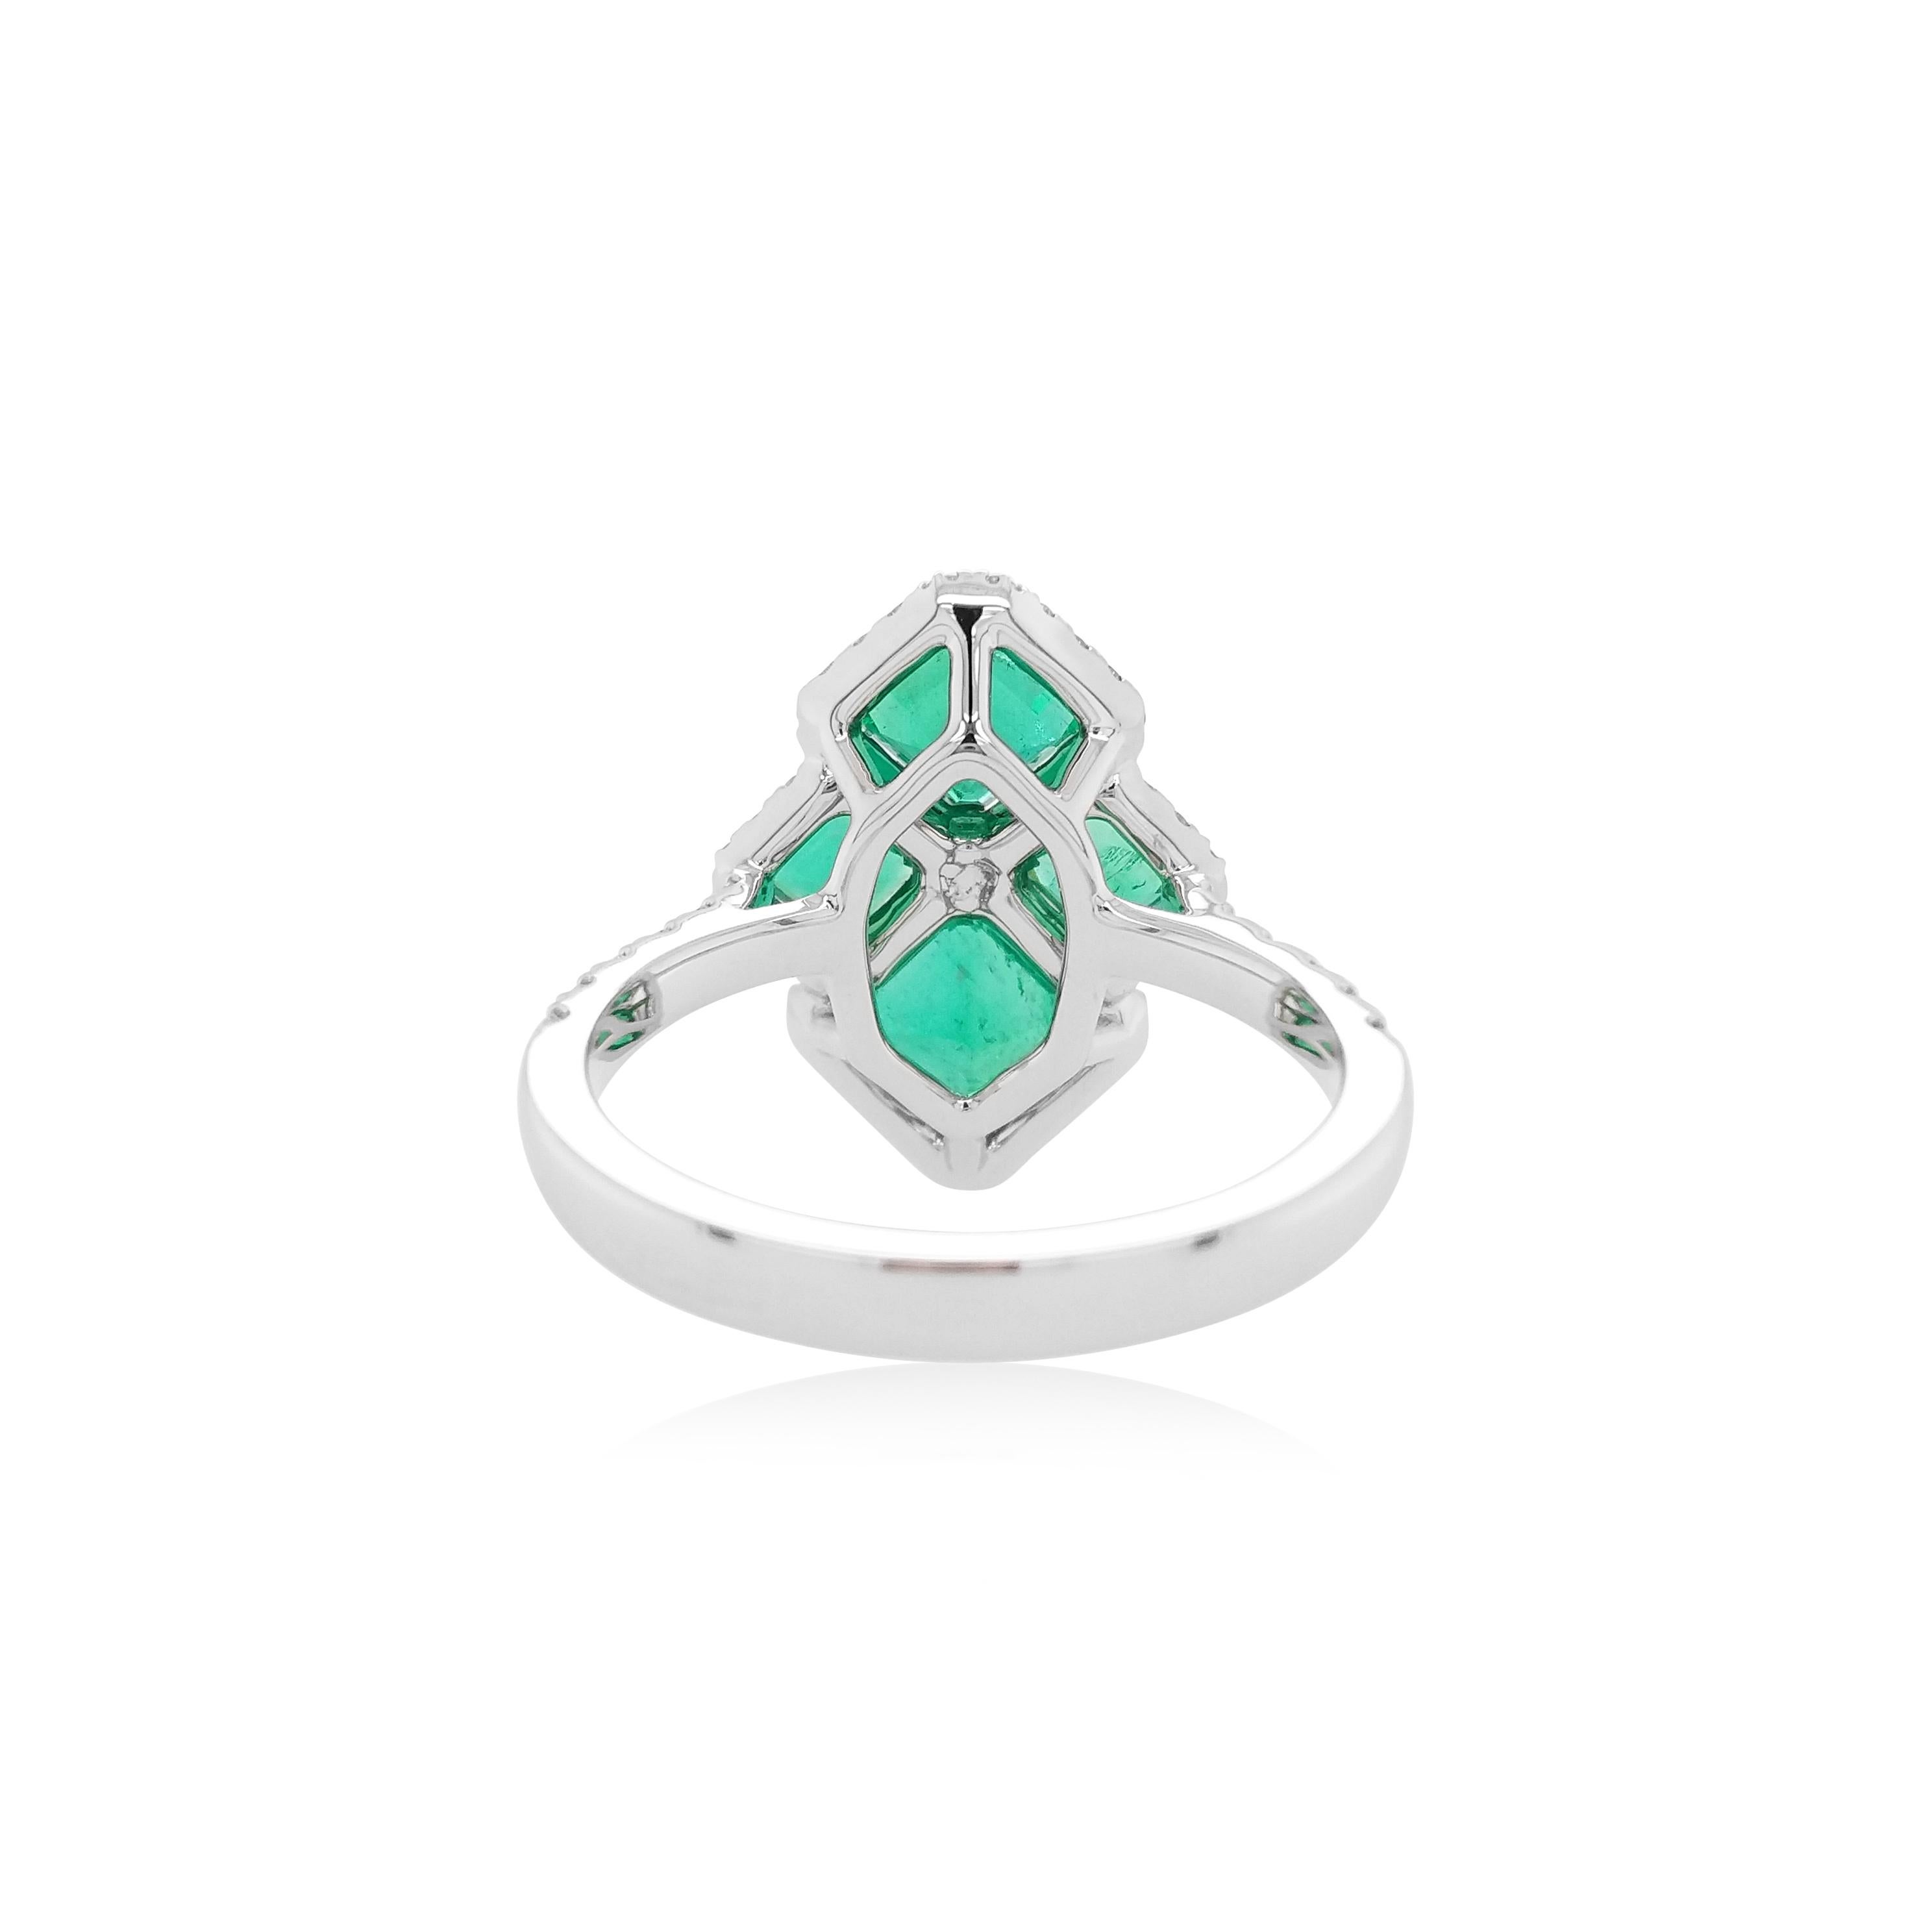 This sophisticated cocktail ring features vibrant emerald-cut Colombian Emeralds at its forefront, accentuated by delicate white diamond halos in amongst. Set in 18 Karat white gold to enrich the remarkable hues of the emerald and the sparkle of the